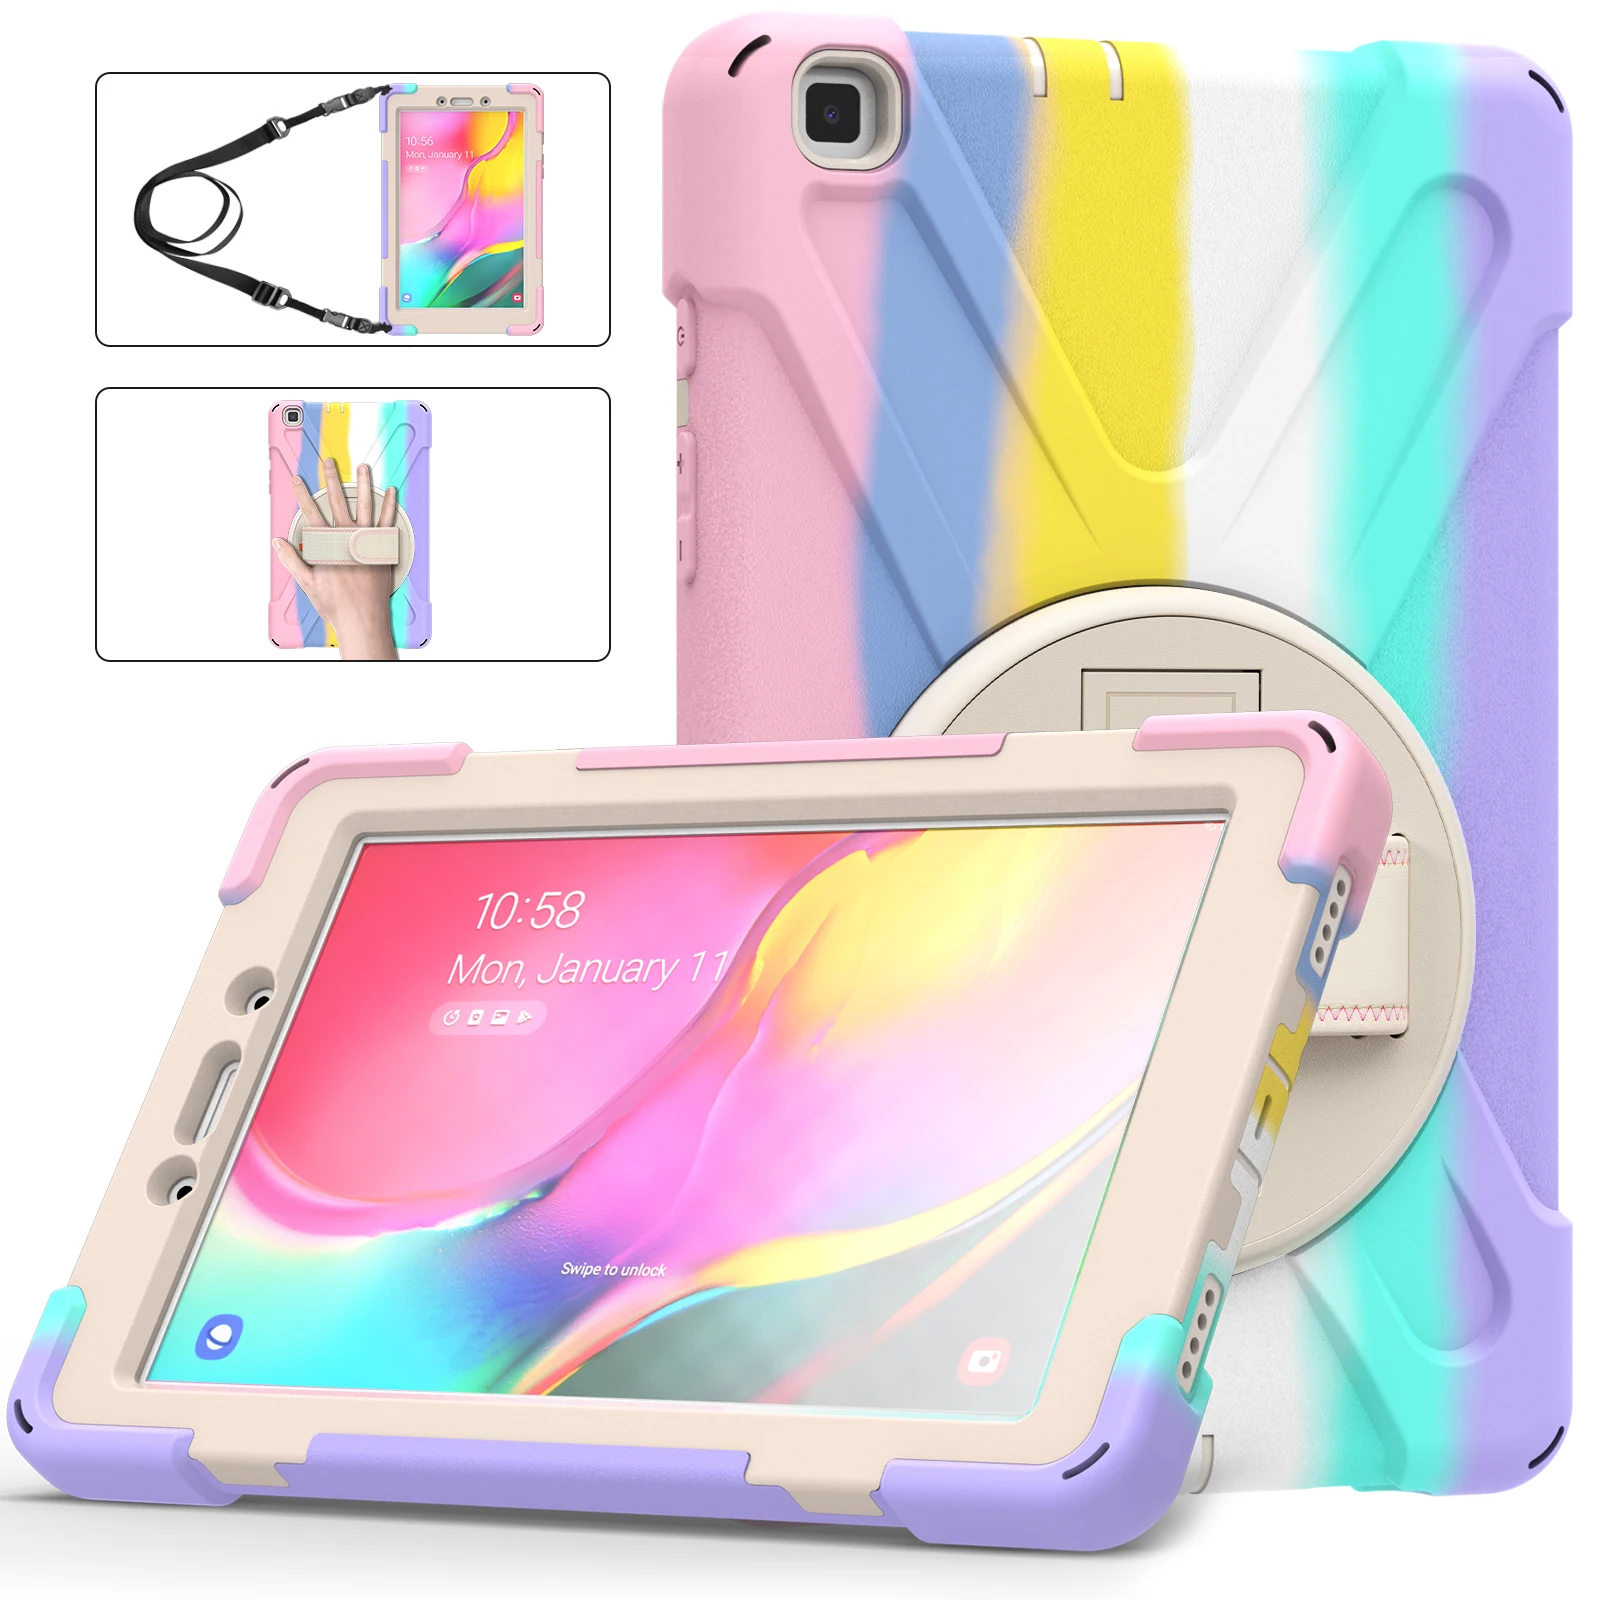 

Rainbow Colorful Symmetry Case For Samsung Galaxy Tab A 8.0 T290 T295 Hand Shoulder Strap Hybrid Armor Kickstand Talbet Cover